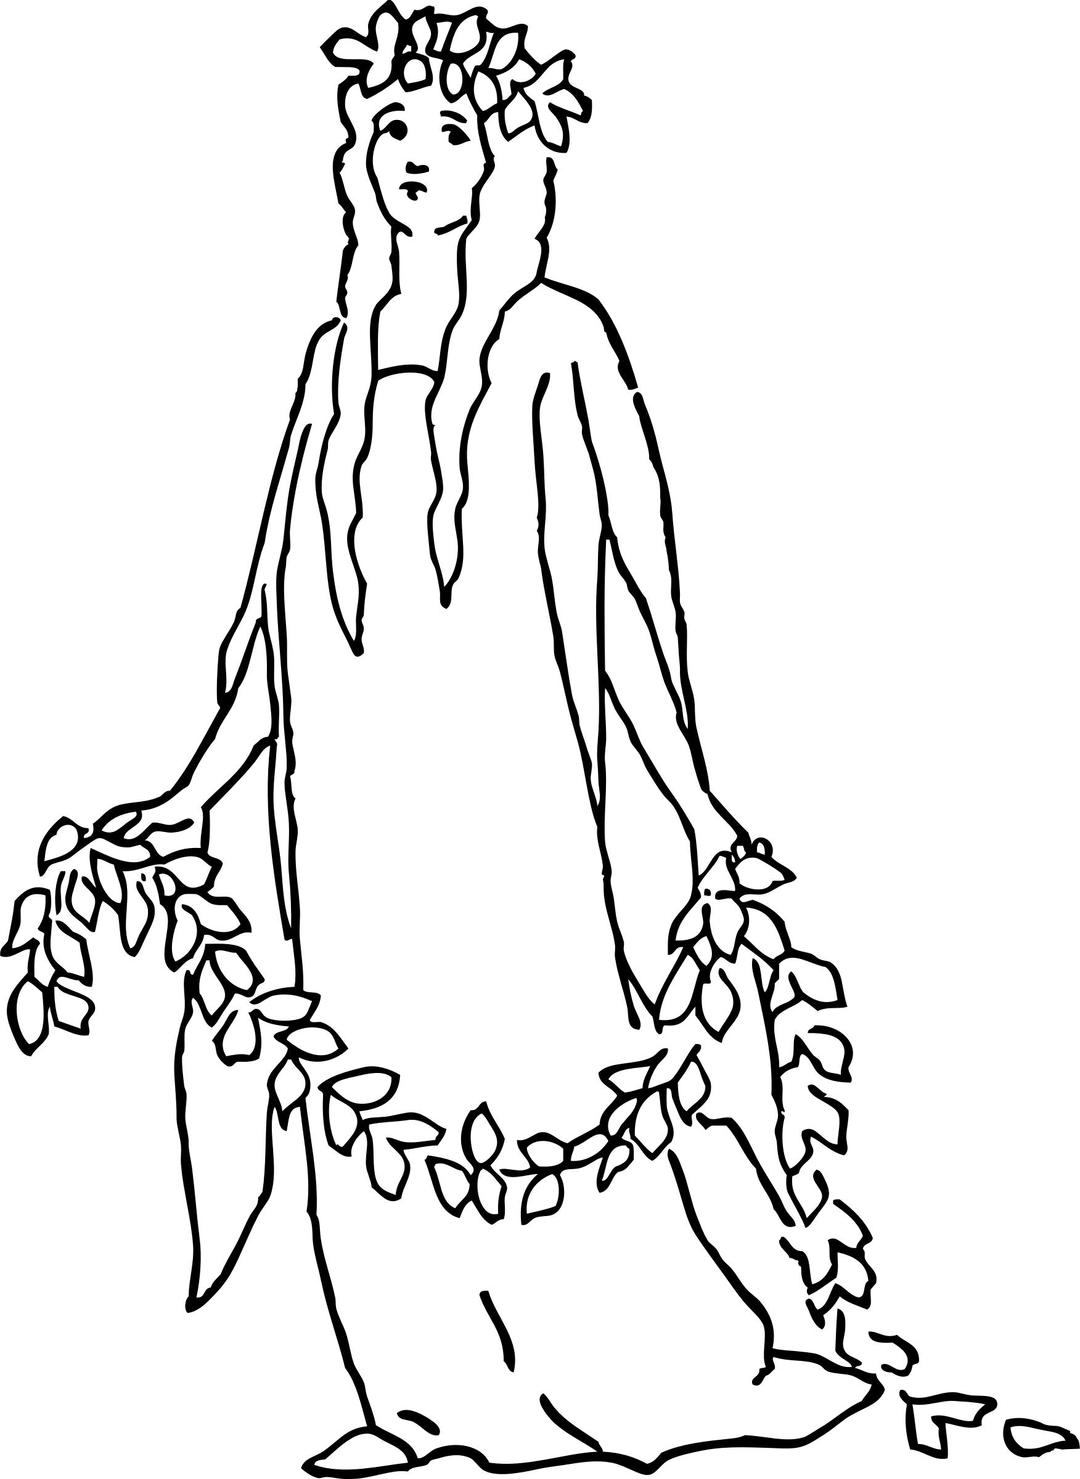 a character representing charity png transparent